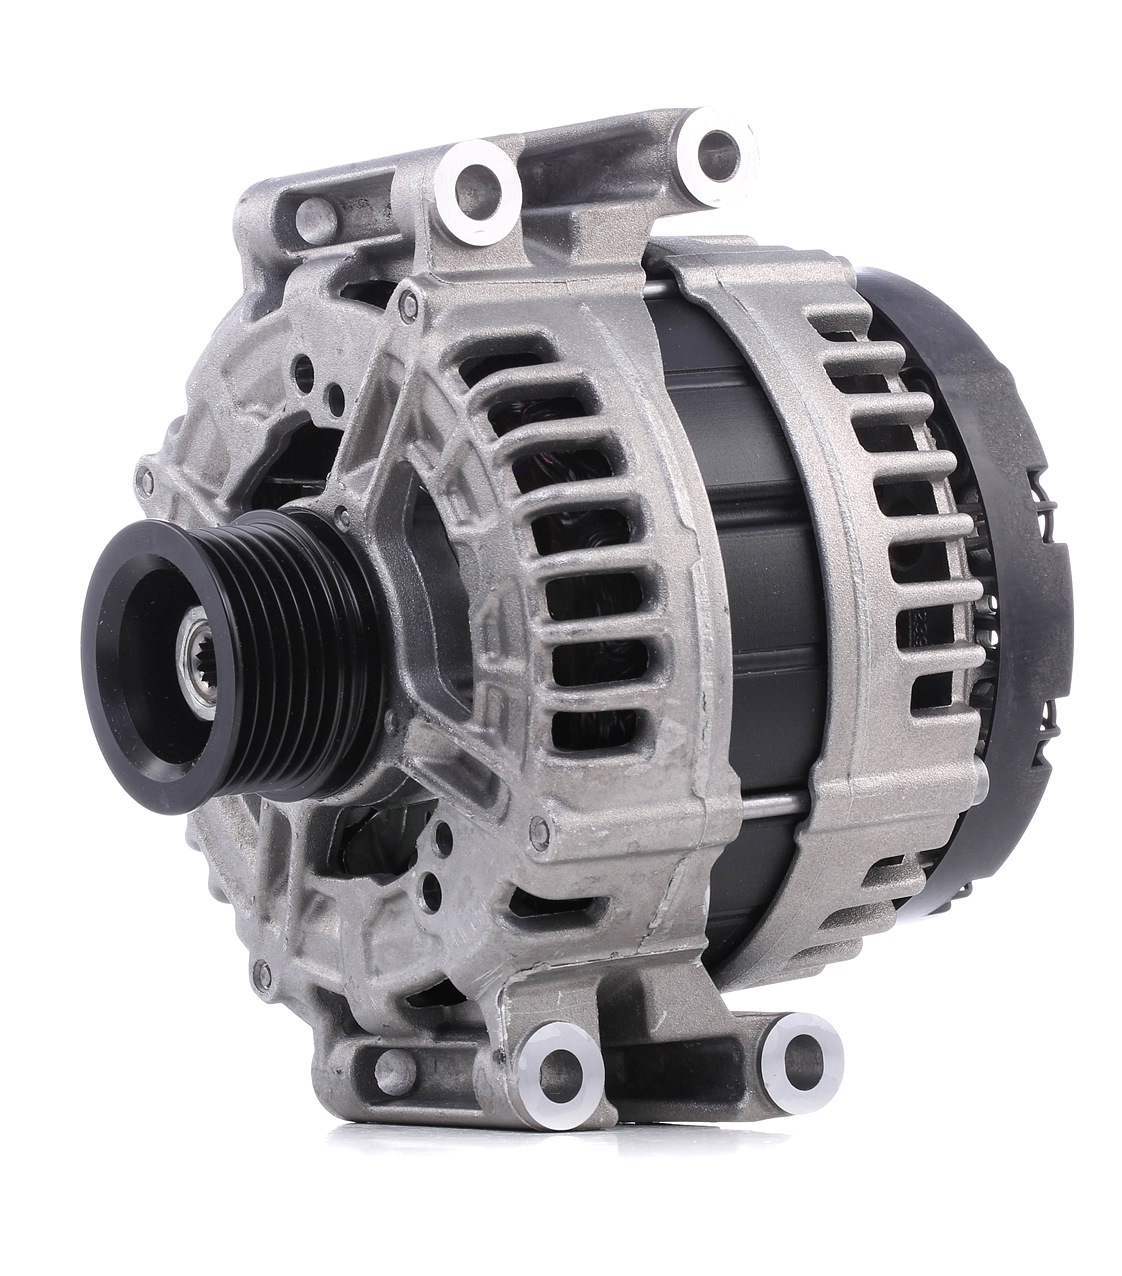 BOSCH 1 986 A00 766 Alternator MERCEDES-BENZ experience and price